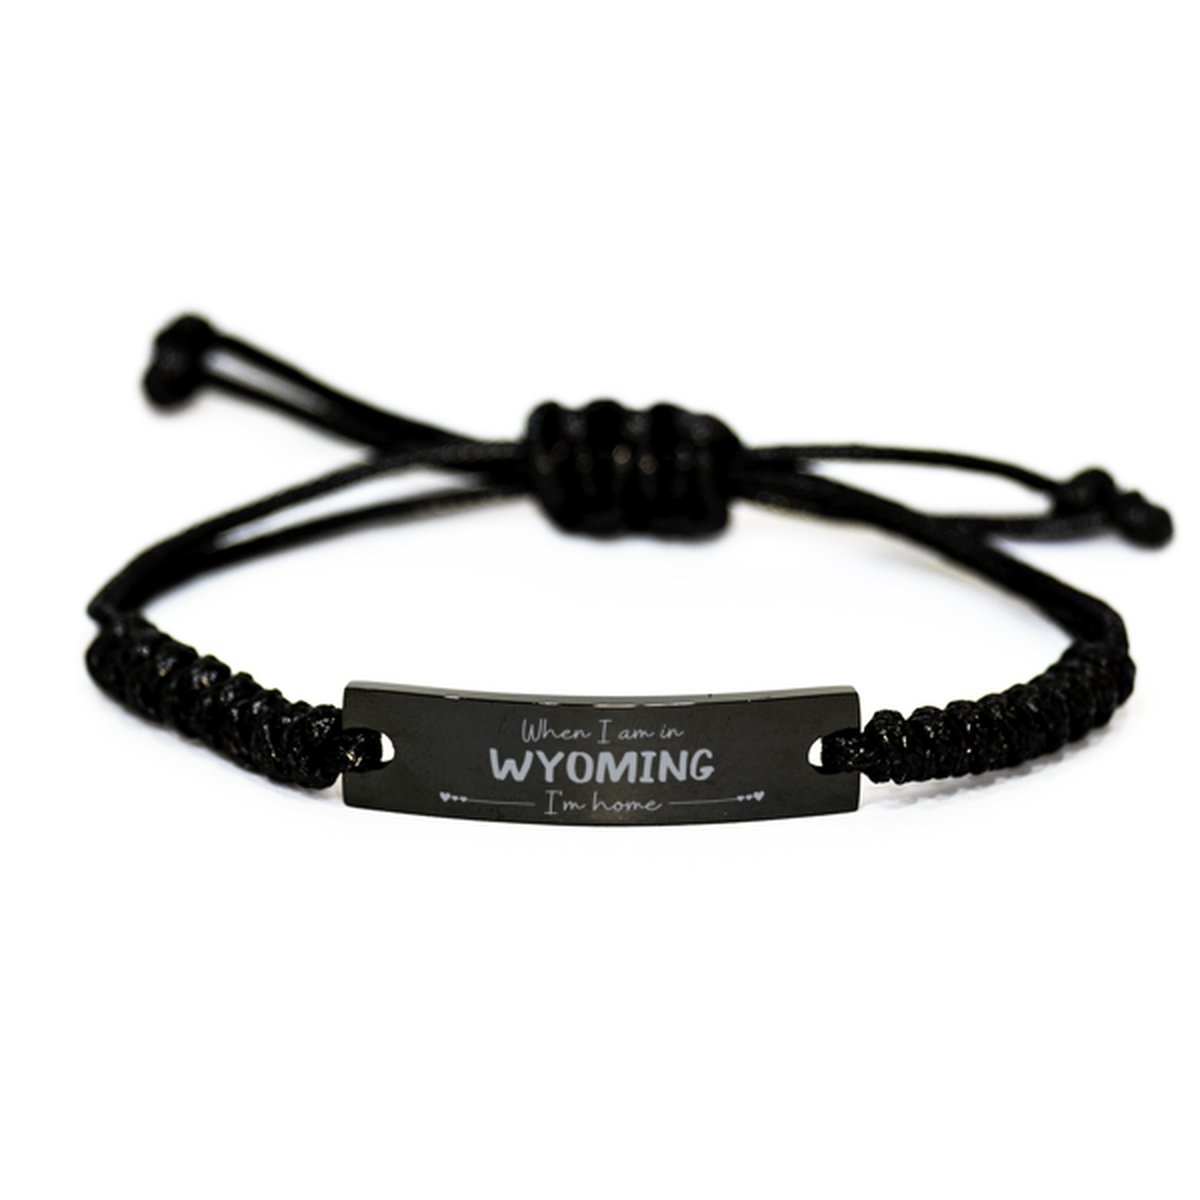 When I am in Wyoming I'm home Black Rope Bracelet, Cheap Gifts For Wyoming, State Wyoming Birthday Gifts for Friends Coworker